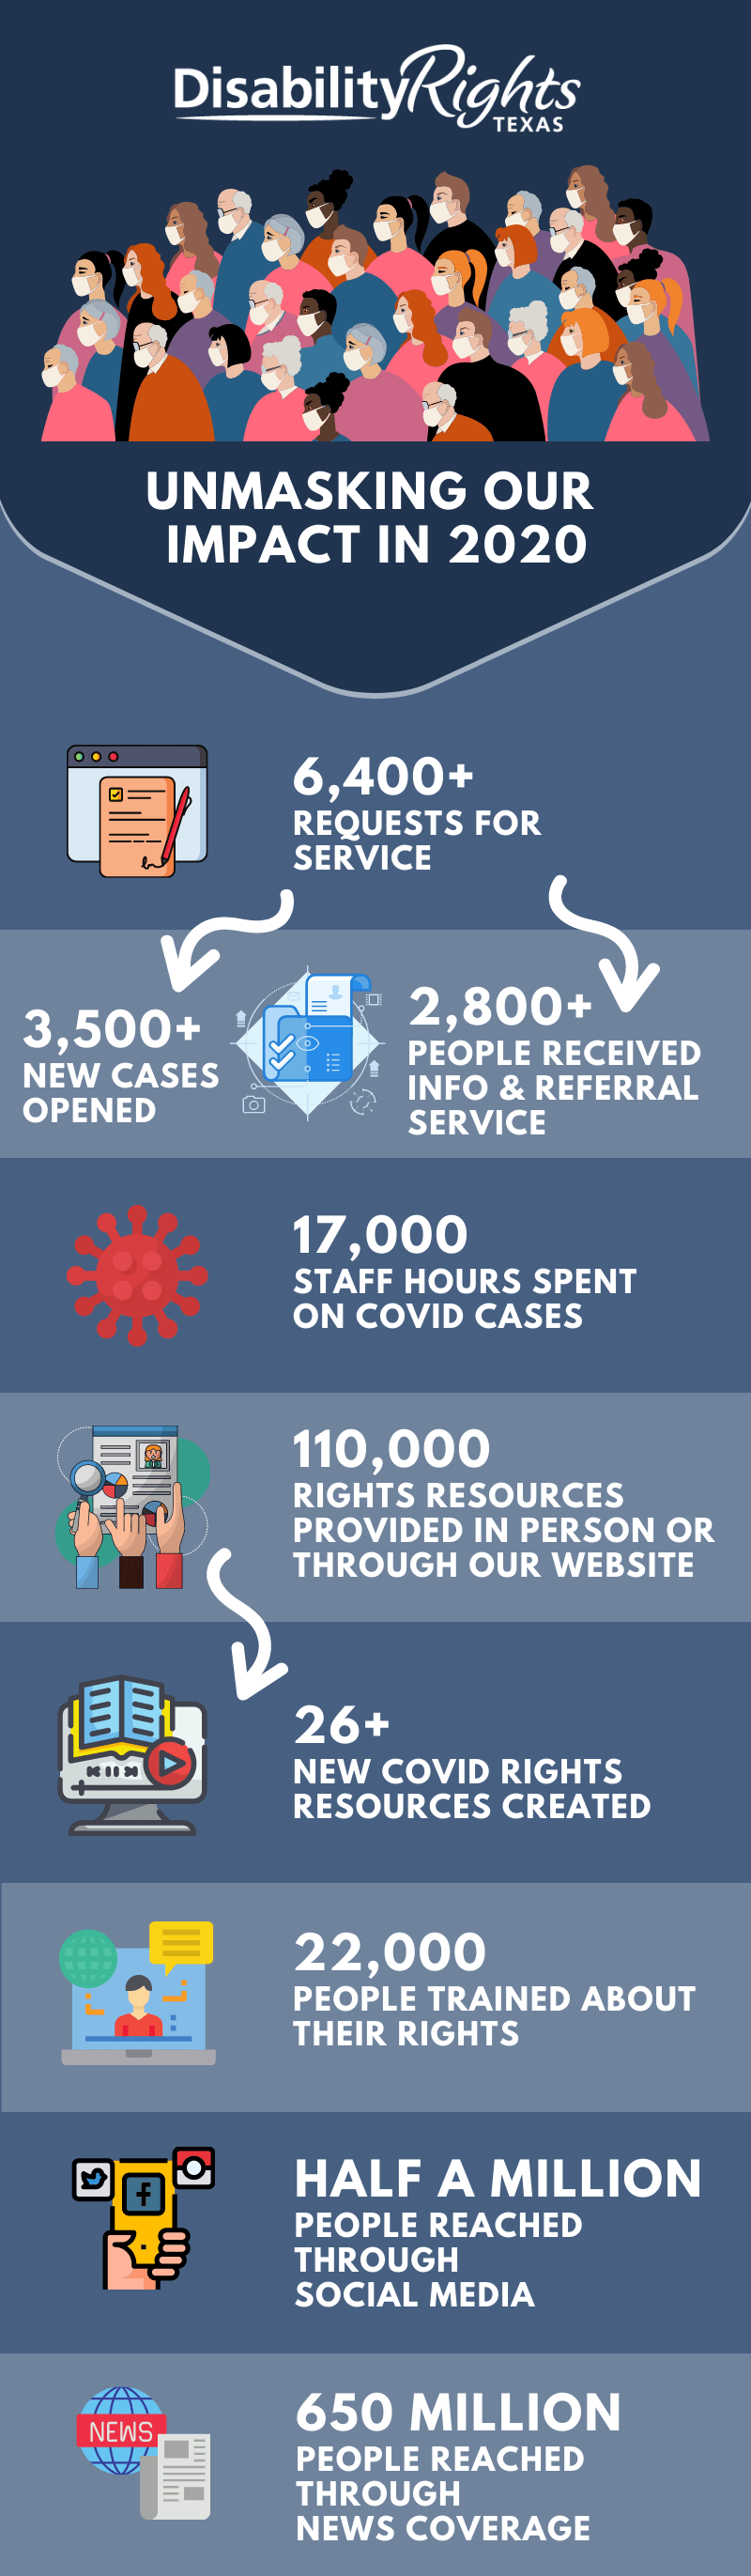 infographic of our impact in 2020, details in content next to iamge